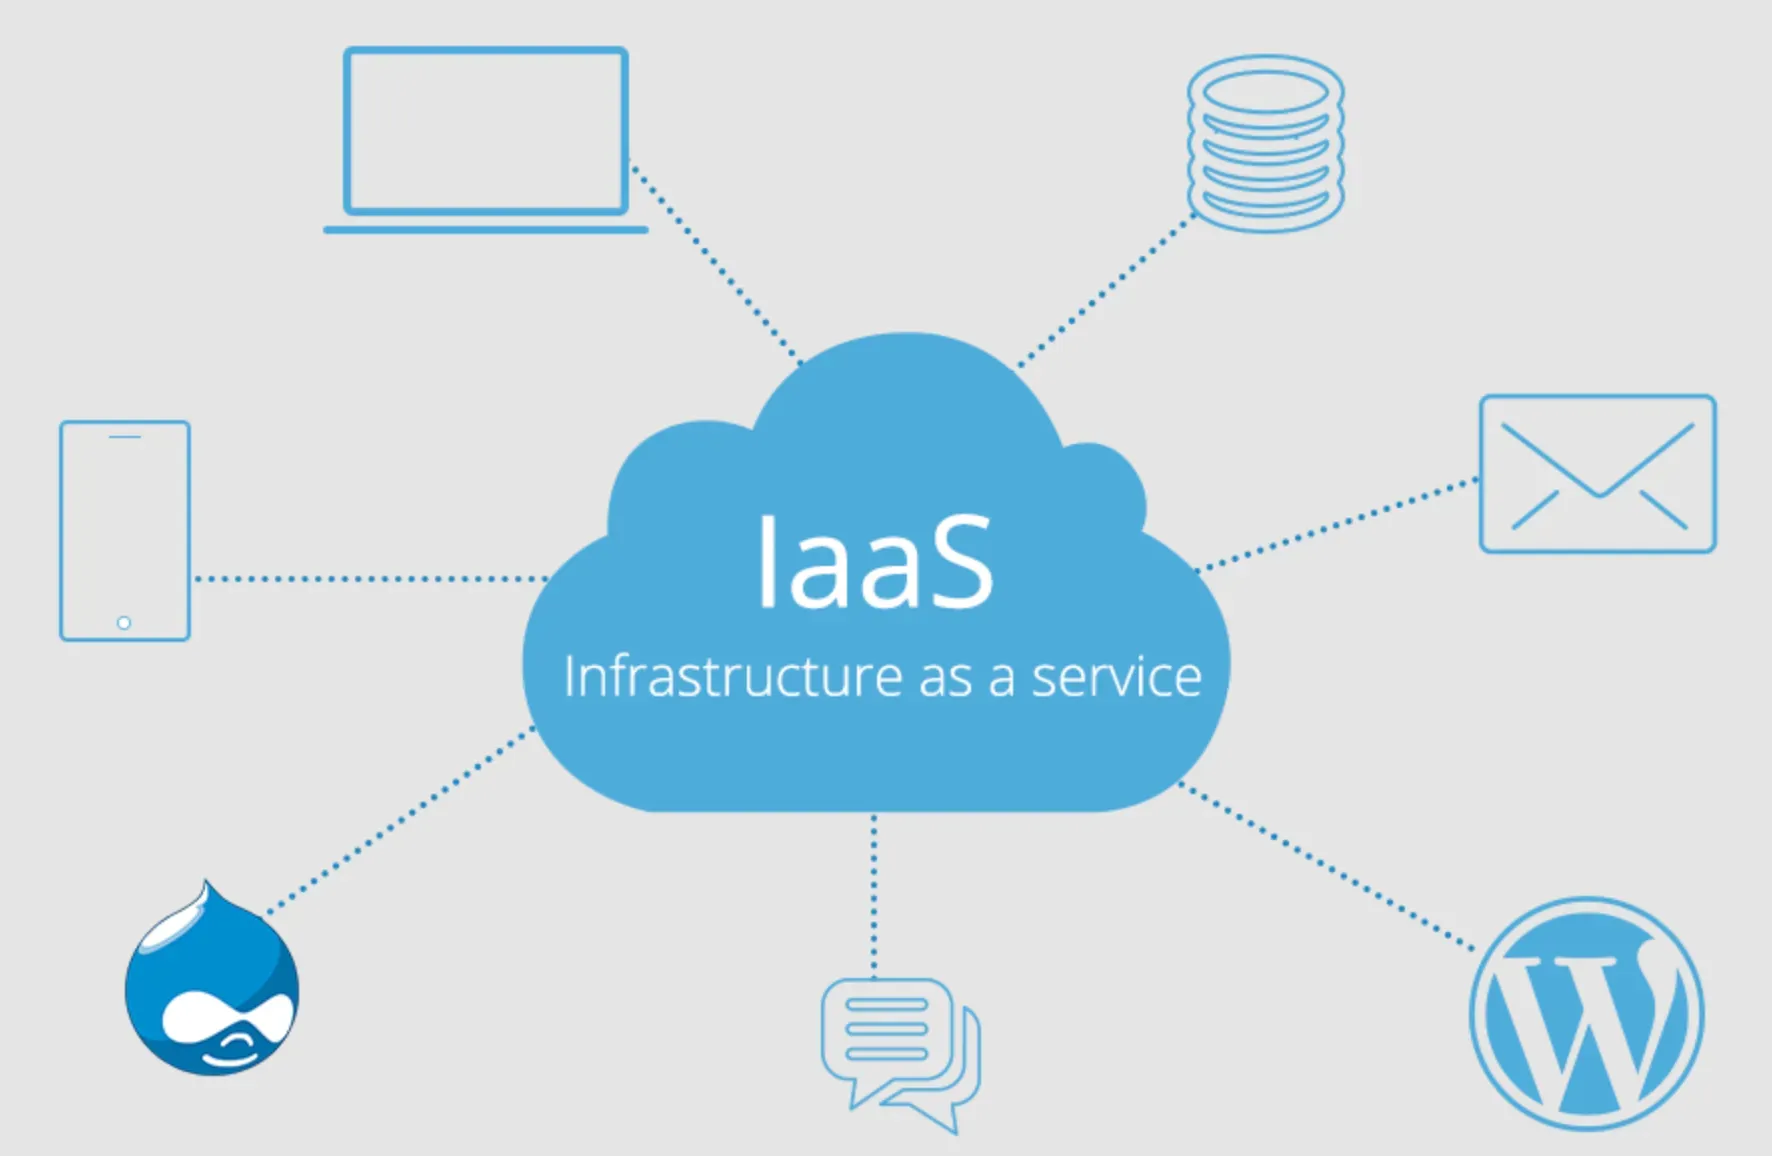 Why Use Infrastructure as a Service?